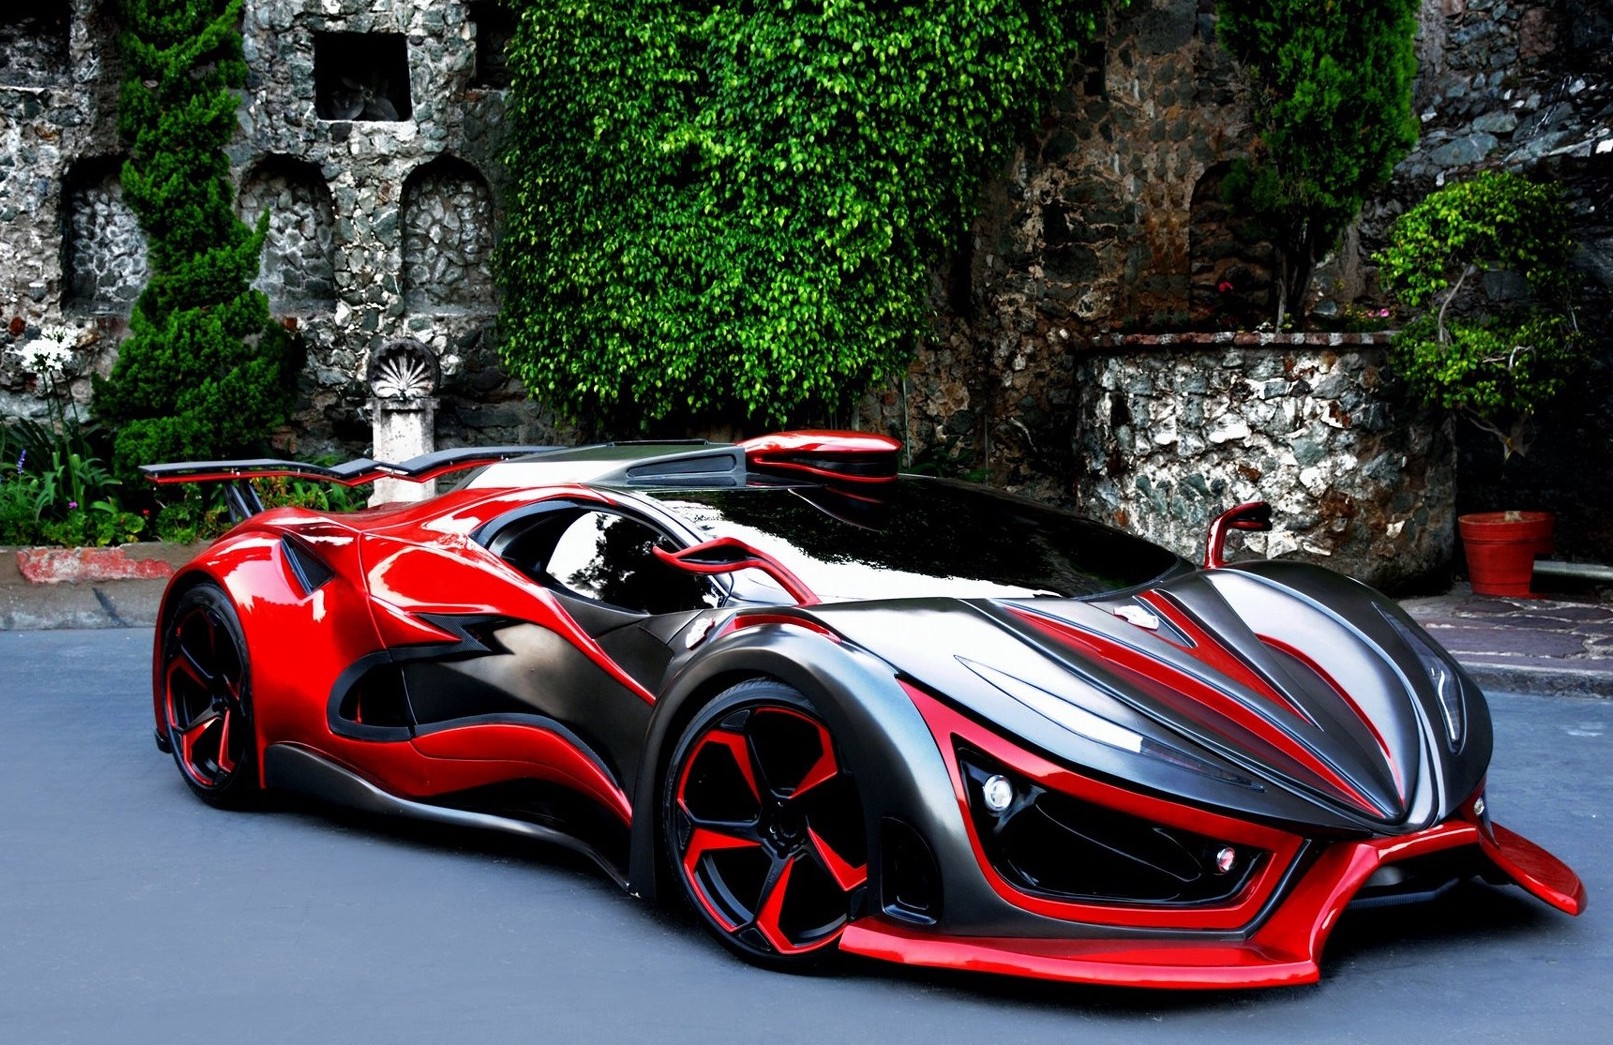 1400hp Inferno supercar to go into production soon